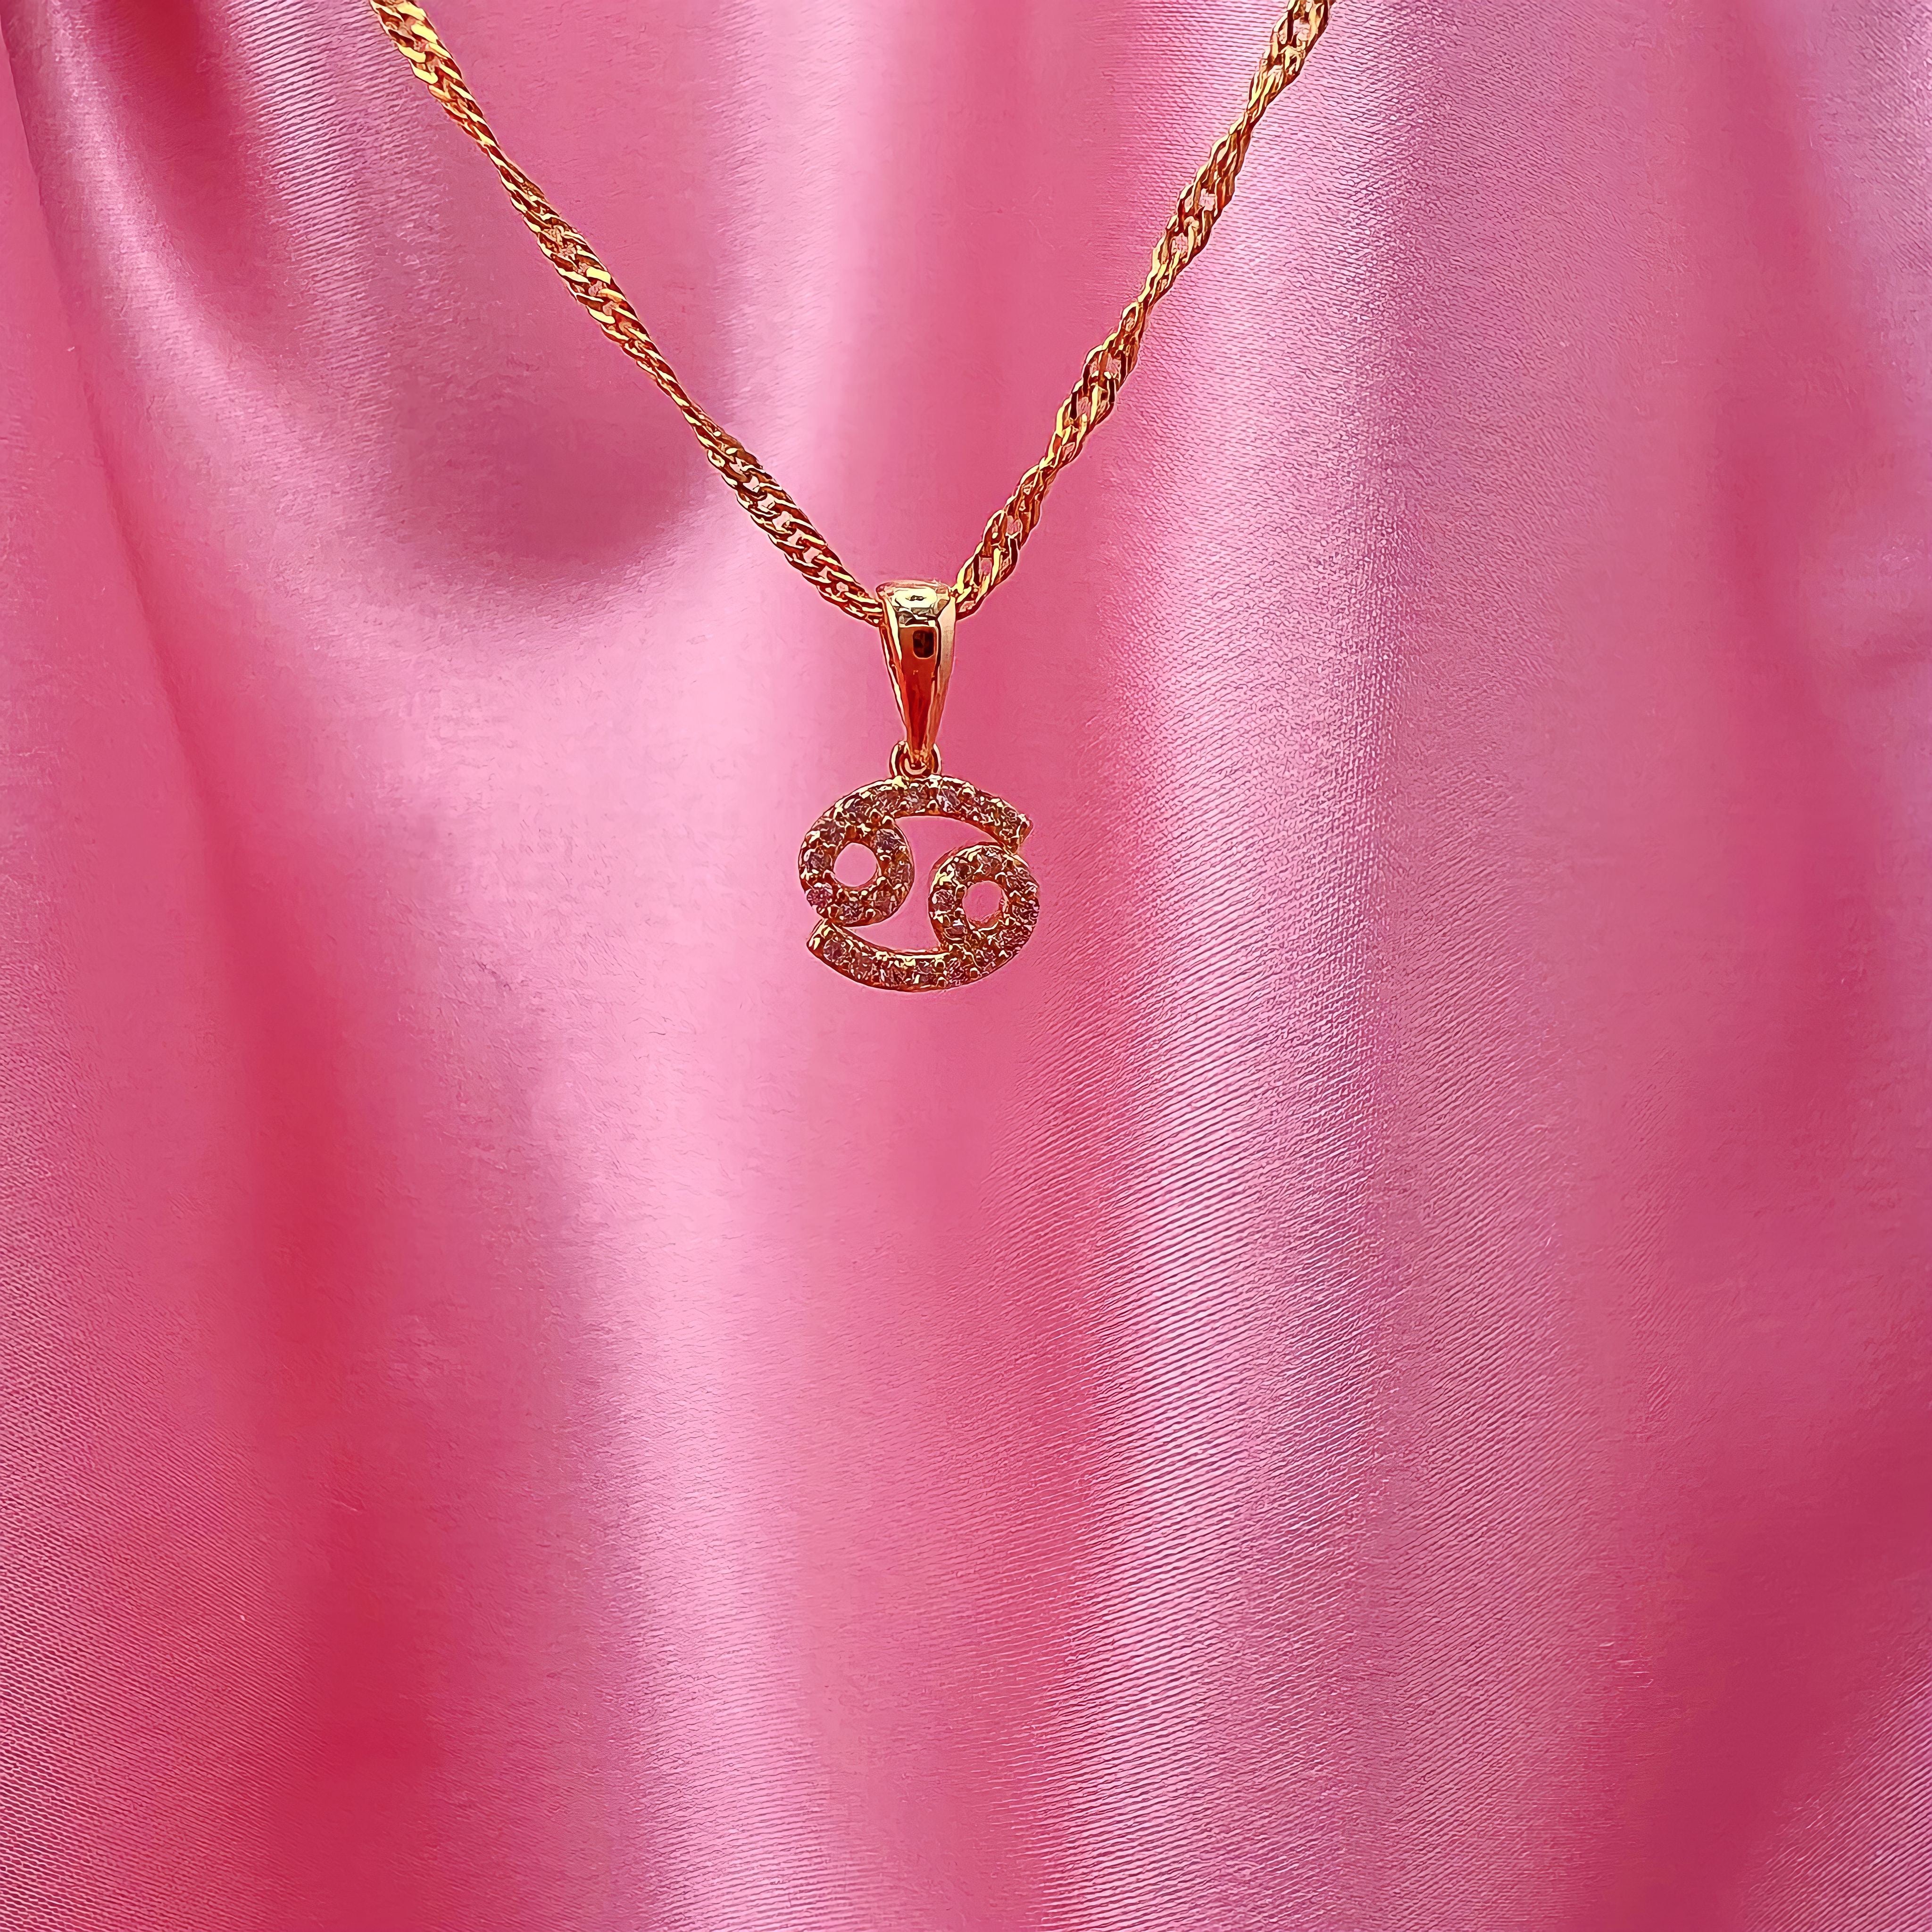 Cancer Gal Necklace